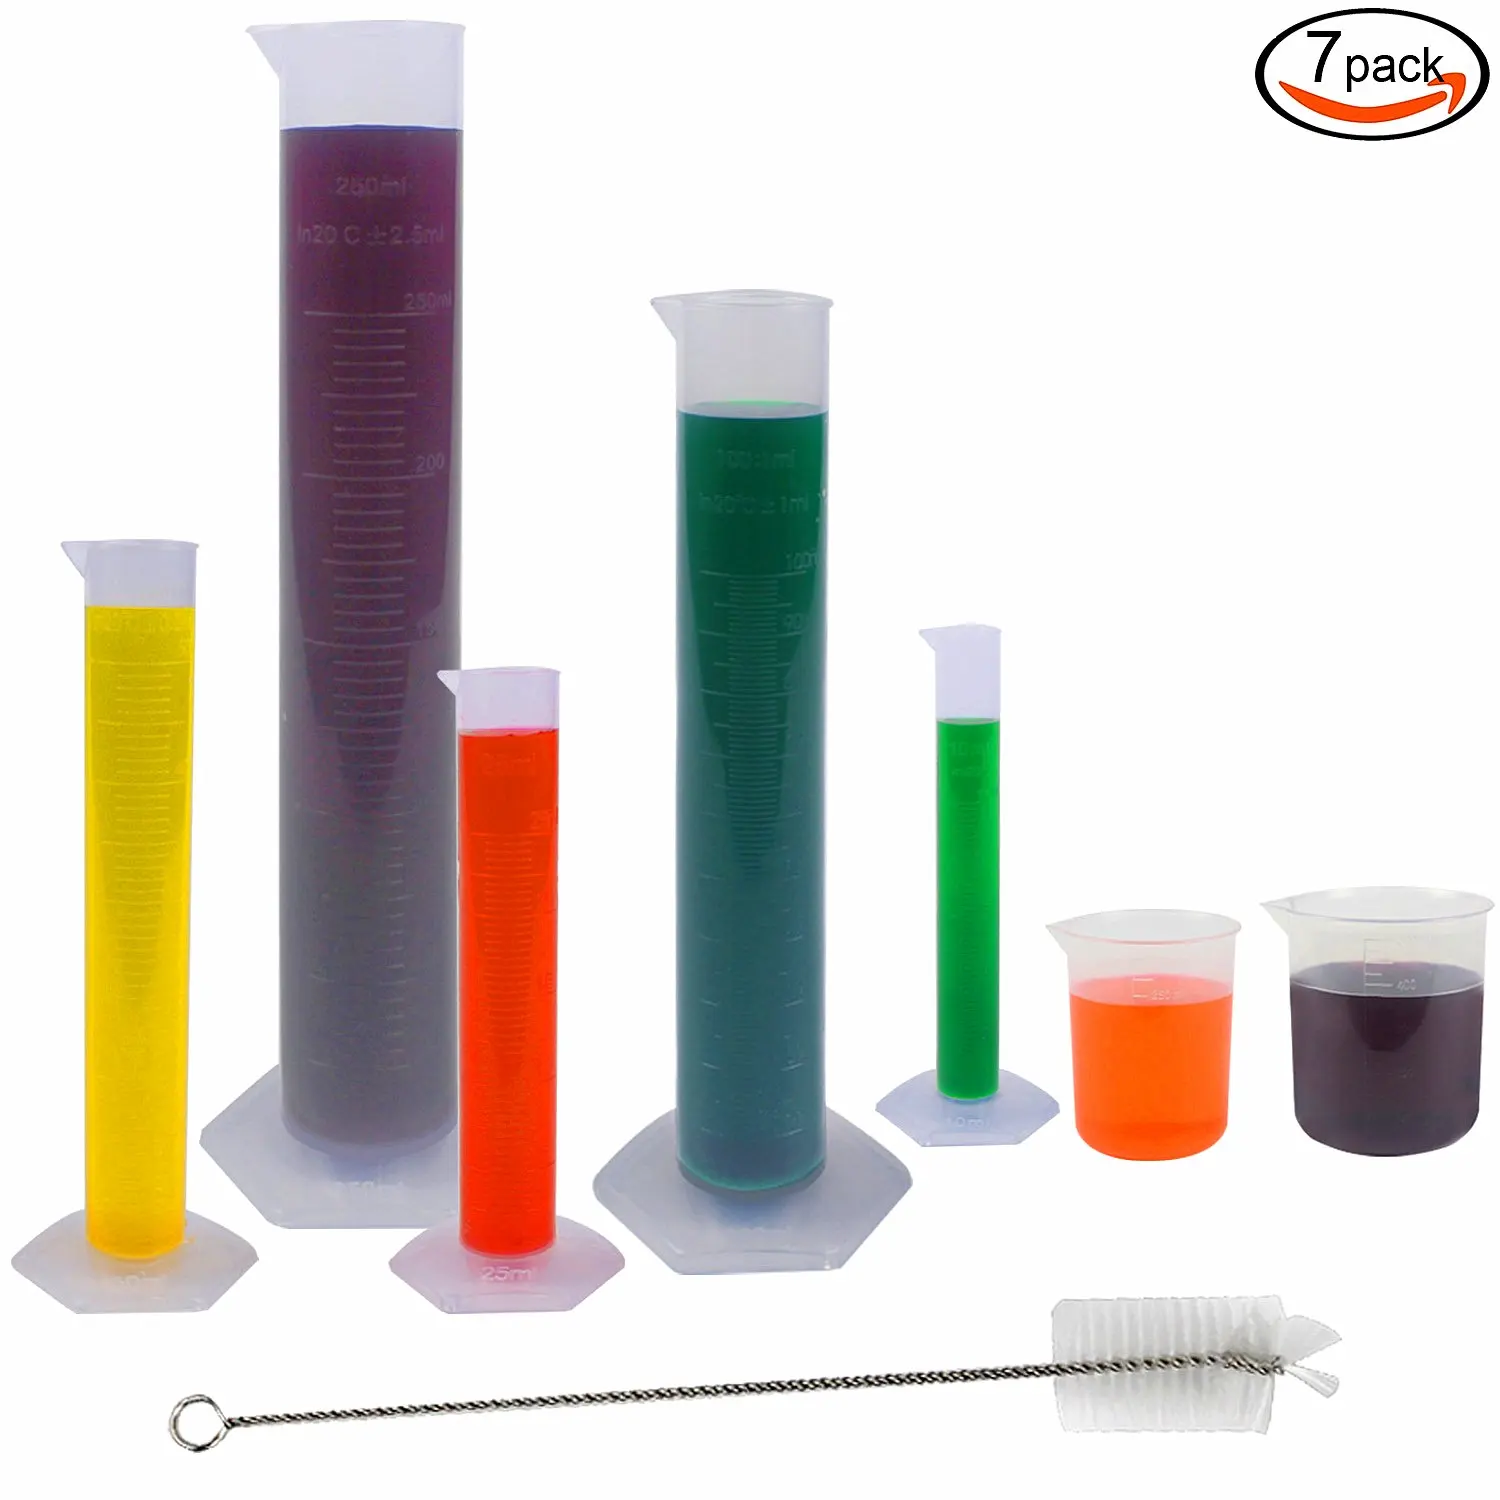 DEPEPE 5 Clear Plastic Graduated Cylinders Measure with 3 Plastic Beakers and 2 Test Tube Brushes